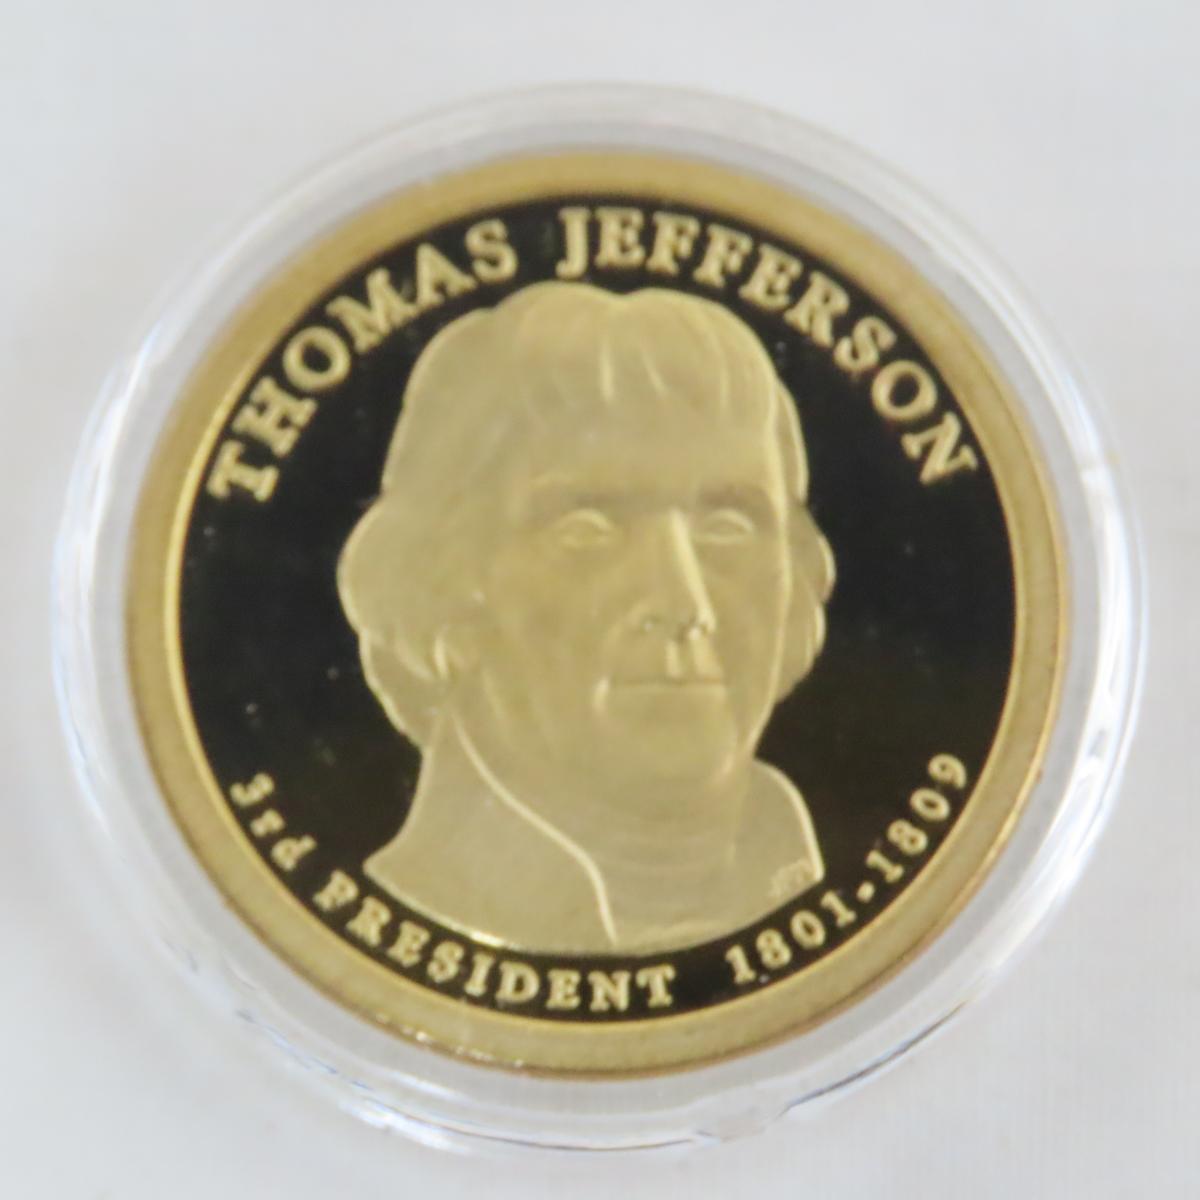 42 Presidential Dollars with proof & signature set